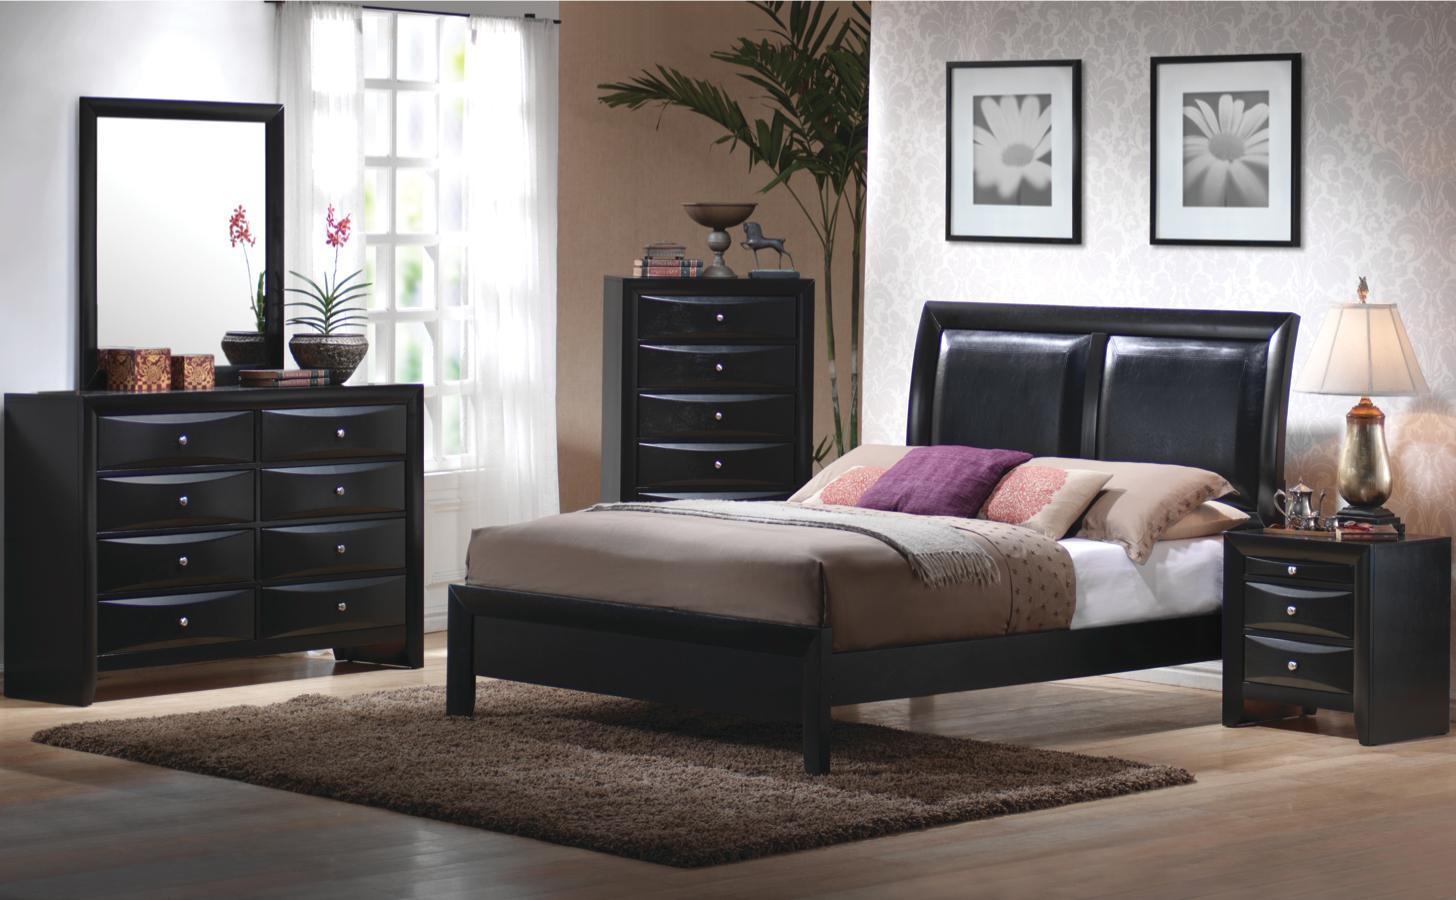 Wood Piece Modern Off Furniture Blaire White Bevelle Queen Bedroom pertaining to size 1456 X 900